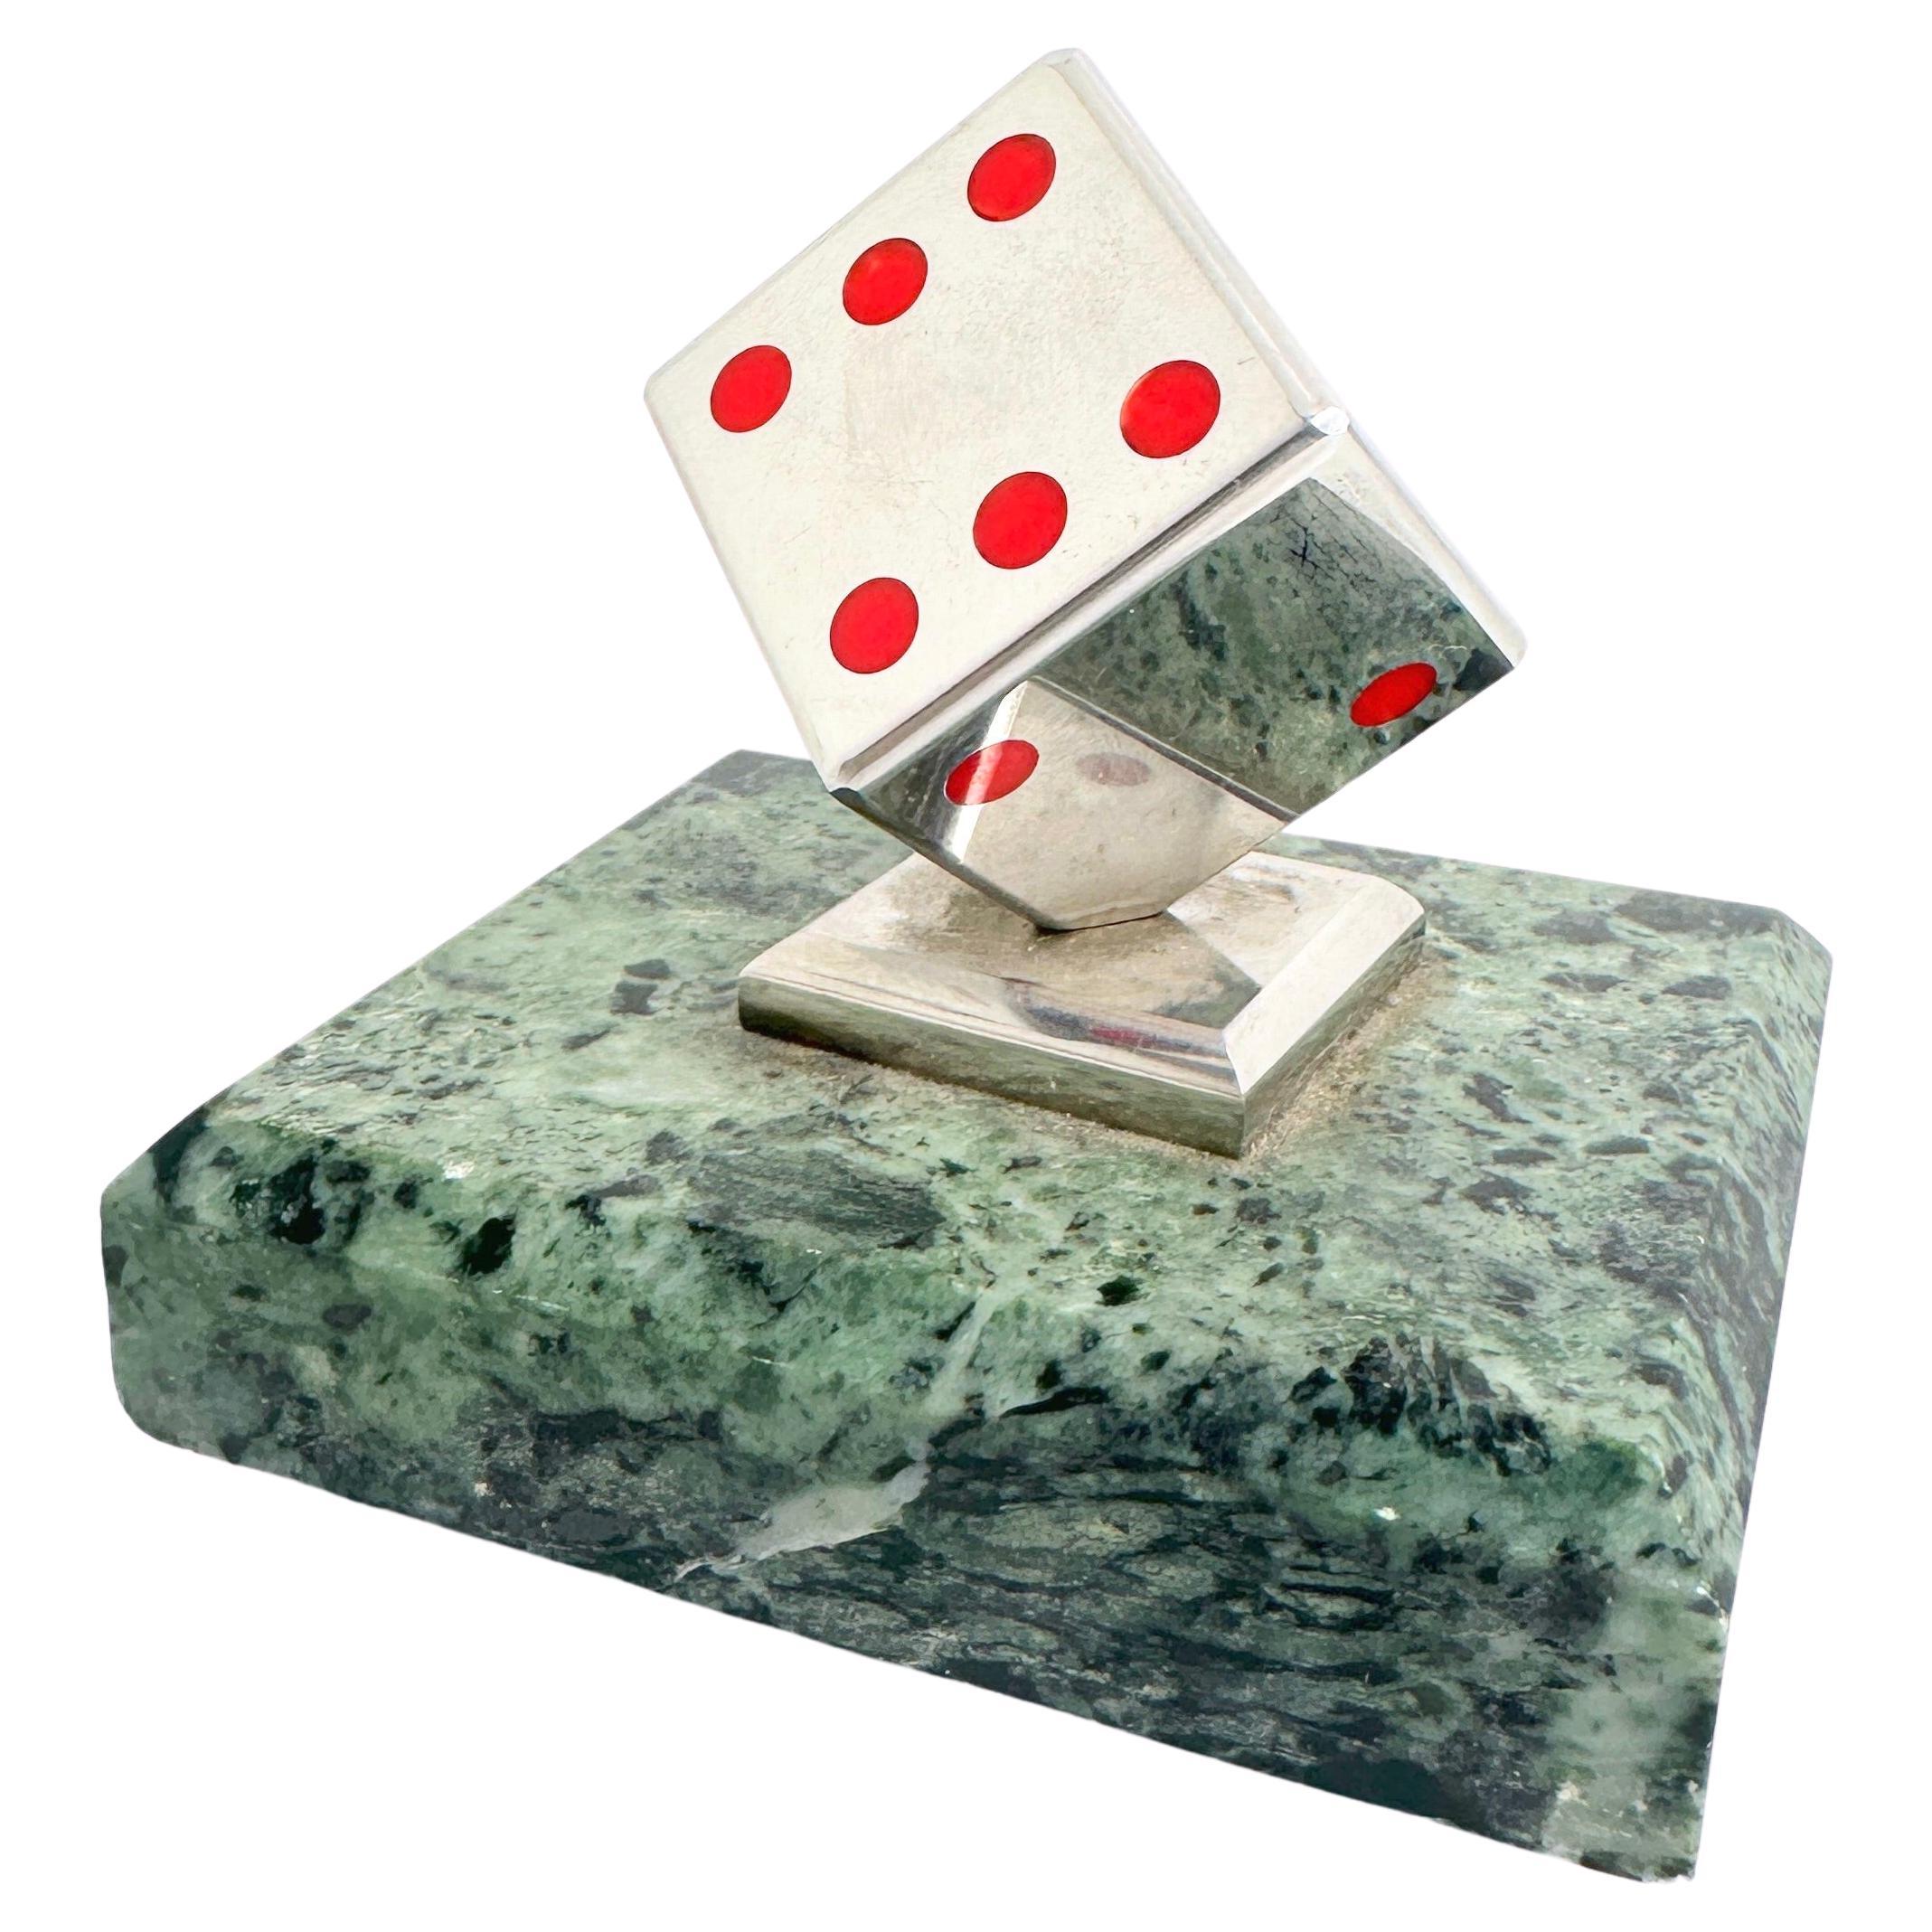 Dice Metal Statue on Marble Base Paper Weight Mid-Century Modern, German, 1970s For Sale